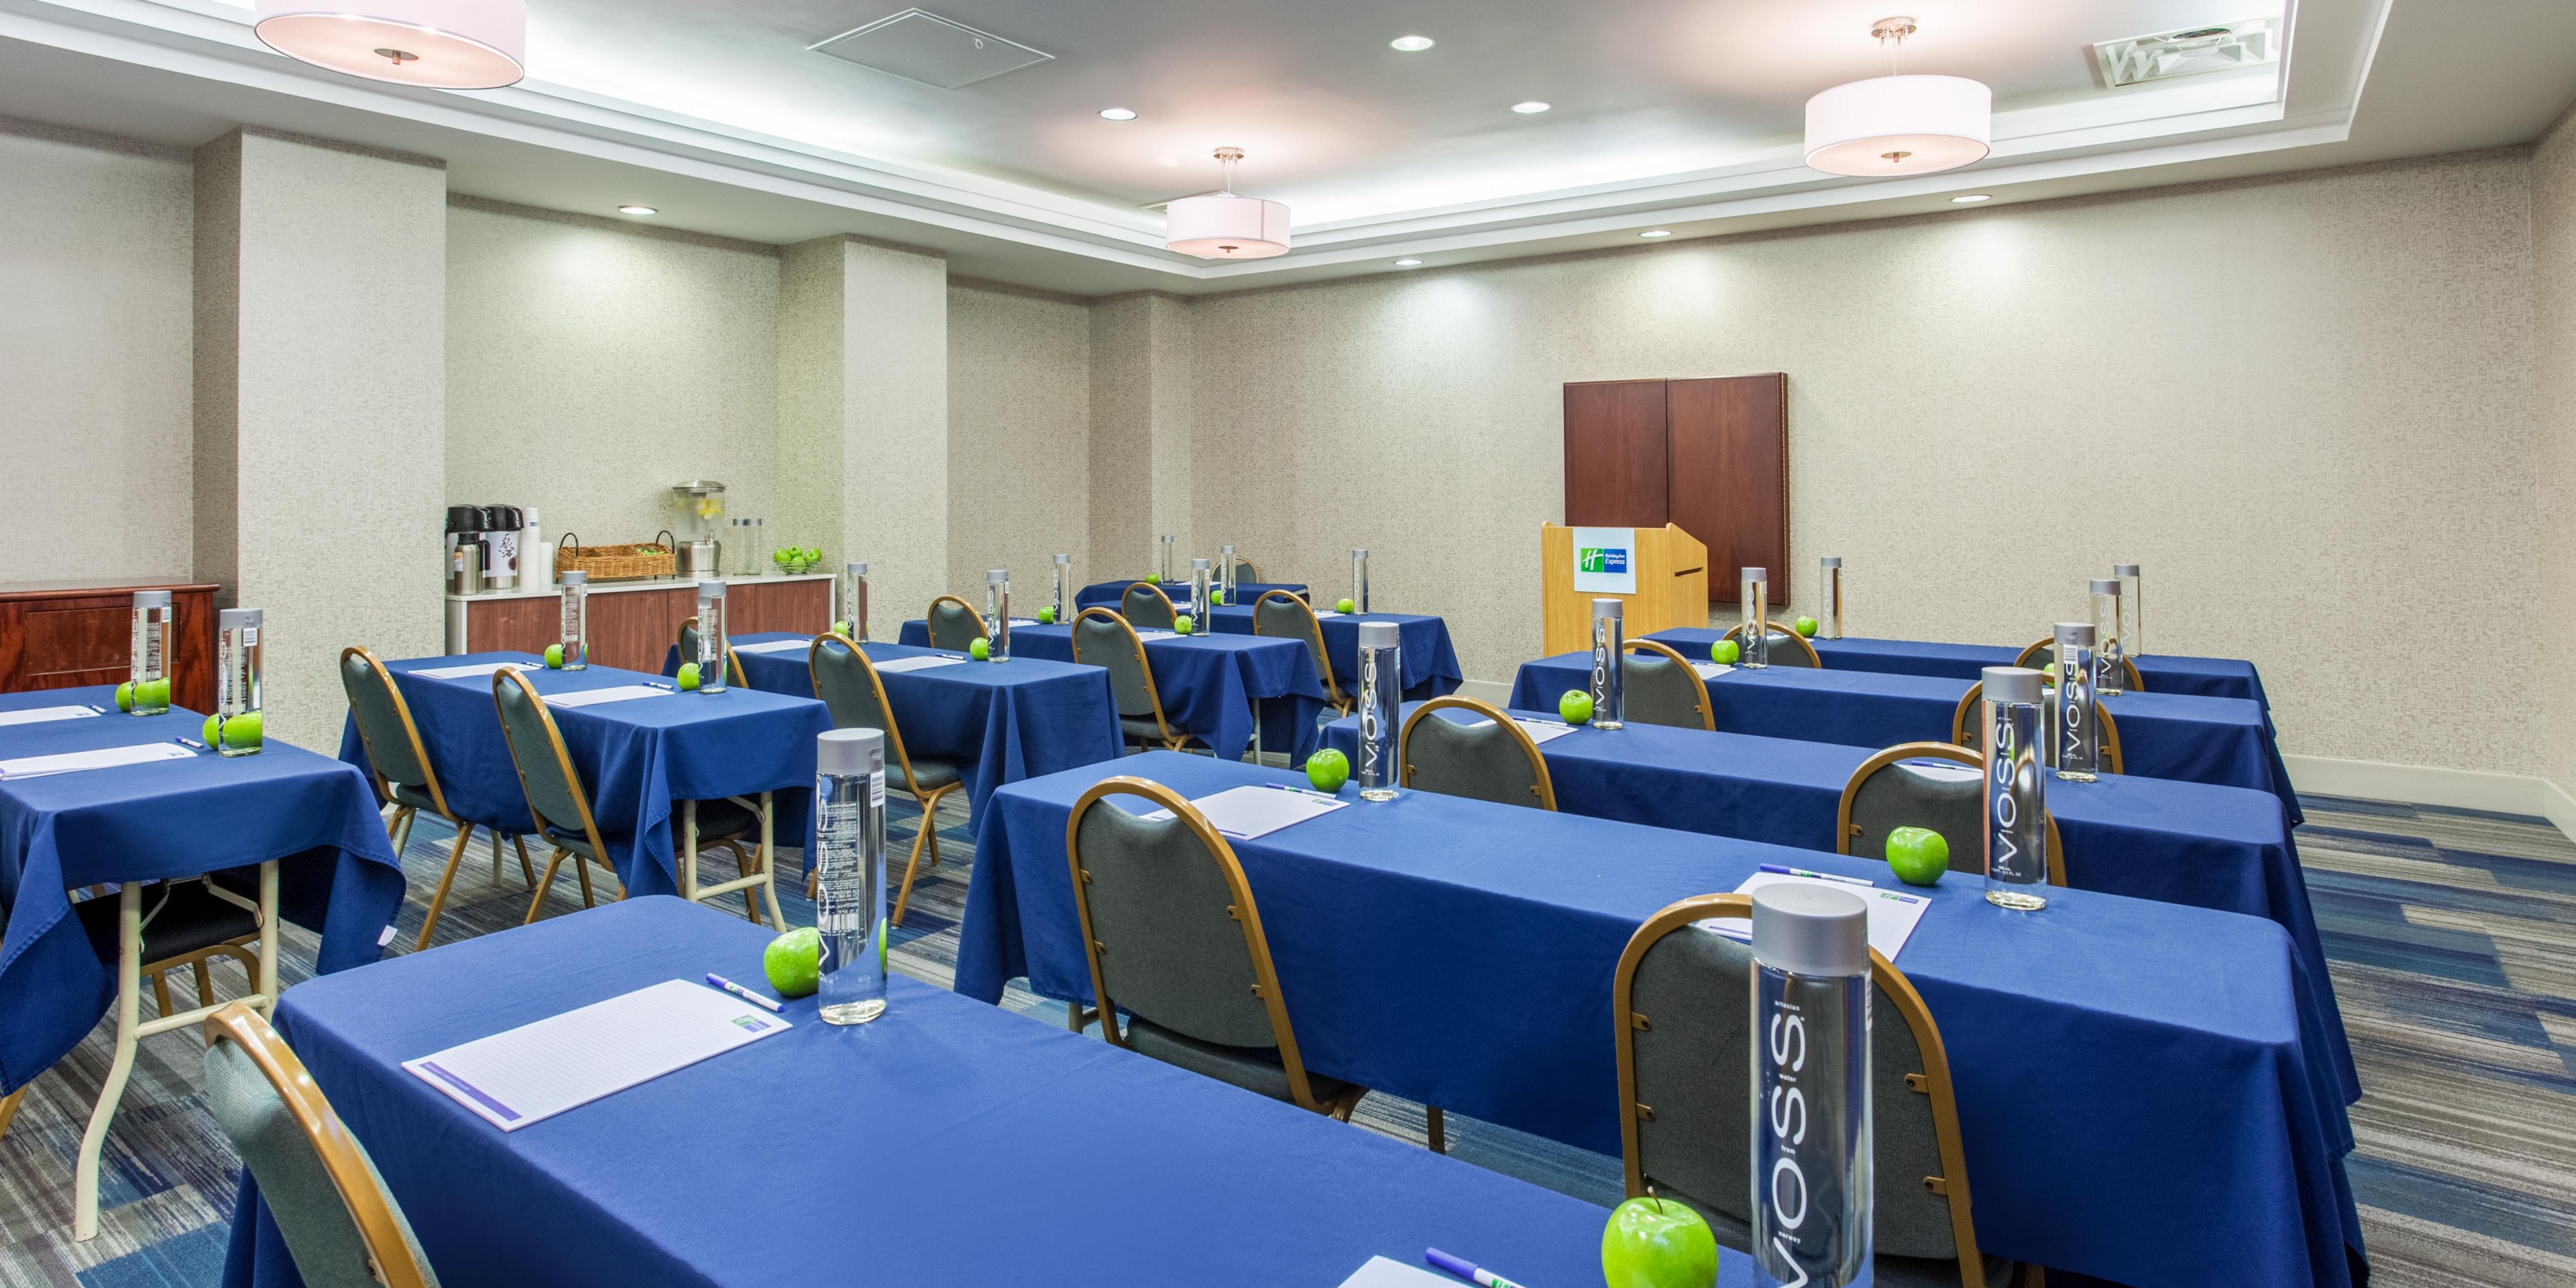 Looking to host your meeting at a hotel with an affordable rate? Below are some of the services we offer event space for birthday parties, bridal/baby showers, training, educational, corporate meetings, wedding party breakfast and after party rentals.